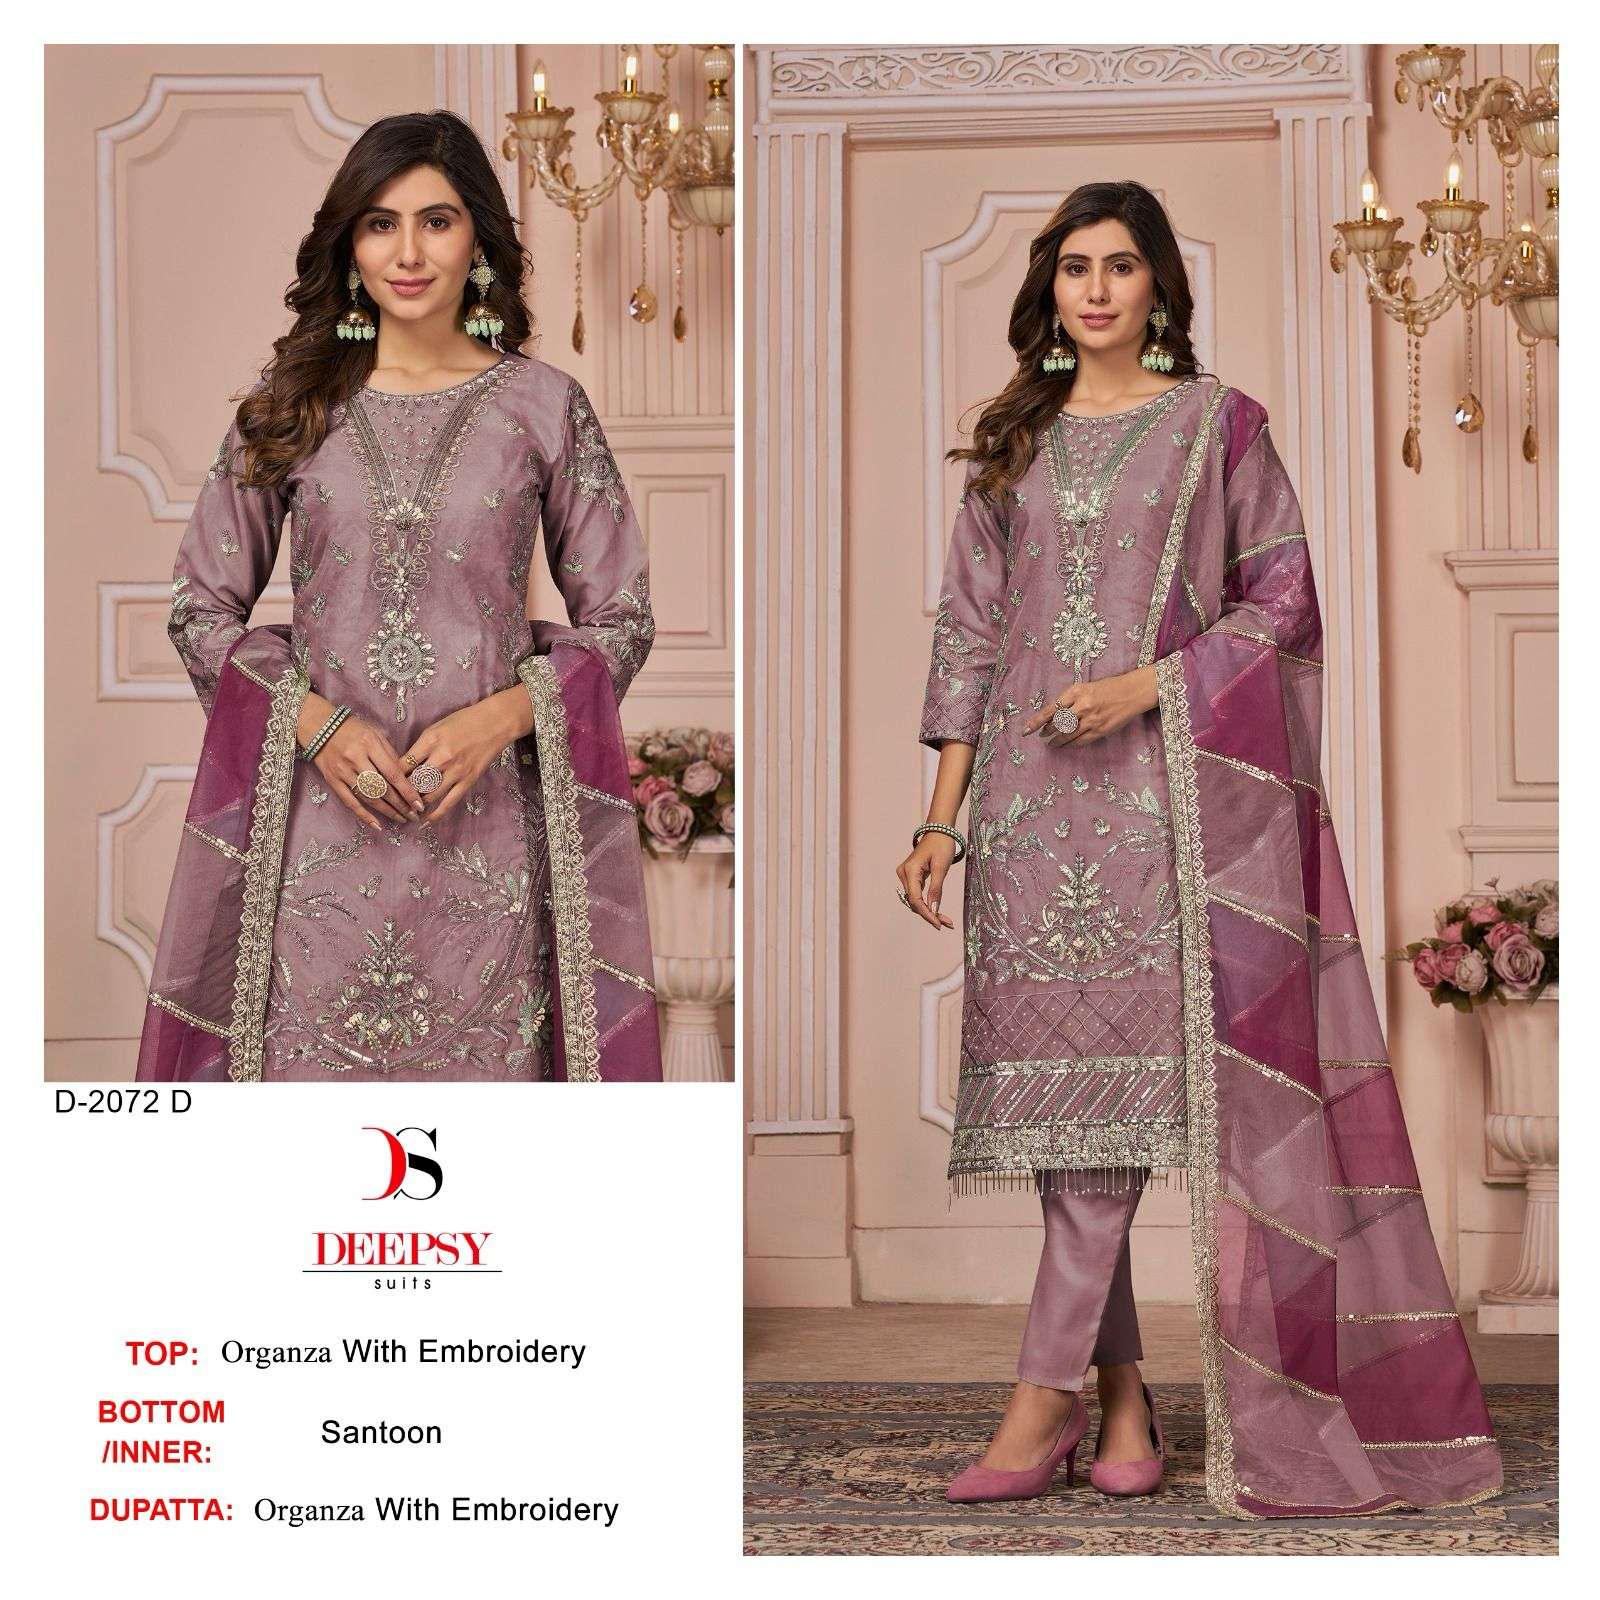 DEEPSY%20SUITS%202072%20ORGANZA%20WITH%20EMBROIDERY%20WORK%20PAKISTANI%20SALWAR%20KAMEEZ%20COLLECTION%20AT%20BEST%20RATE%20(5) 4 2024 01 27 16 02 24